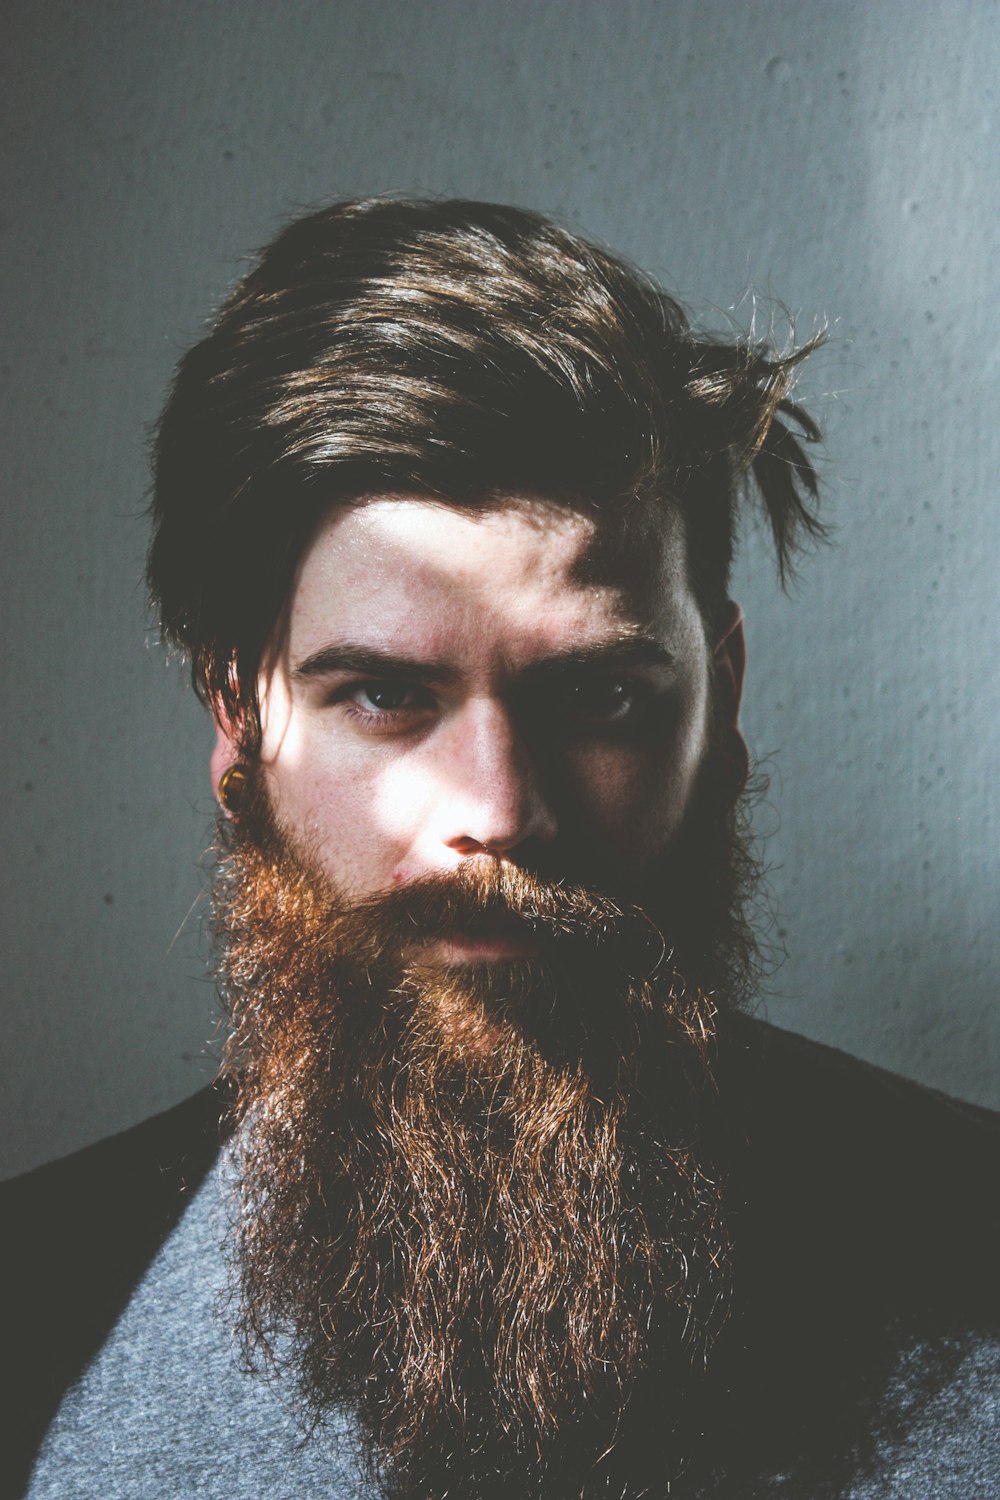 100+ Beard Pictures | Download Free Images on Unsplash